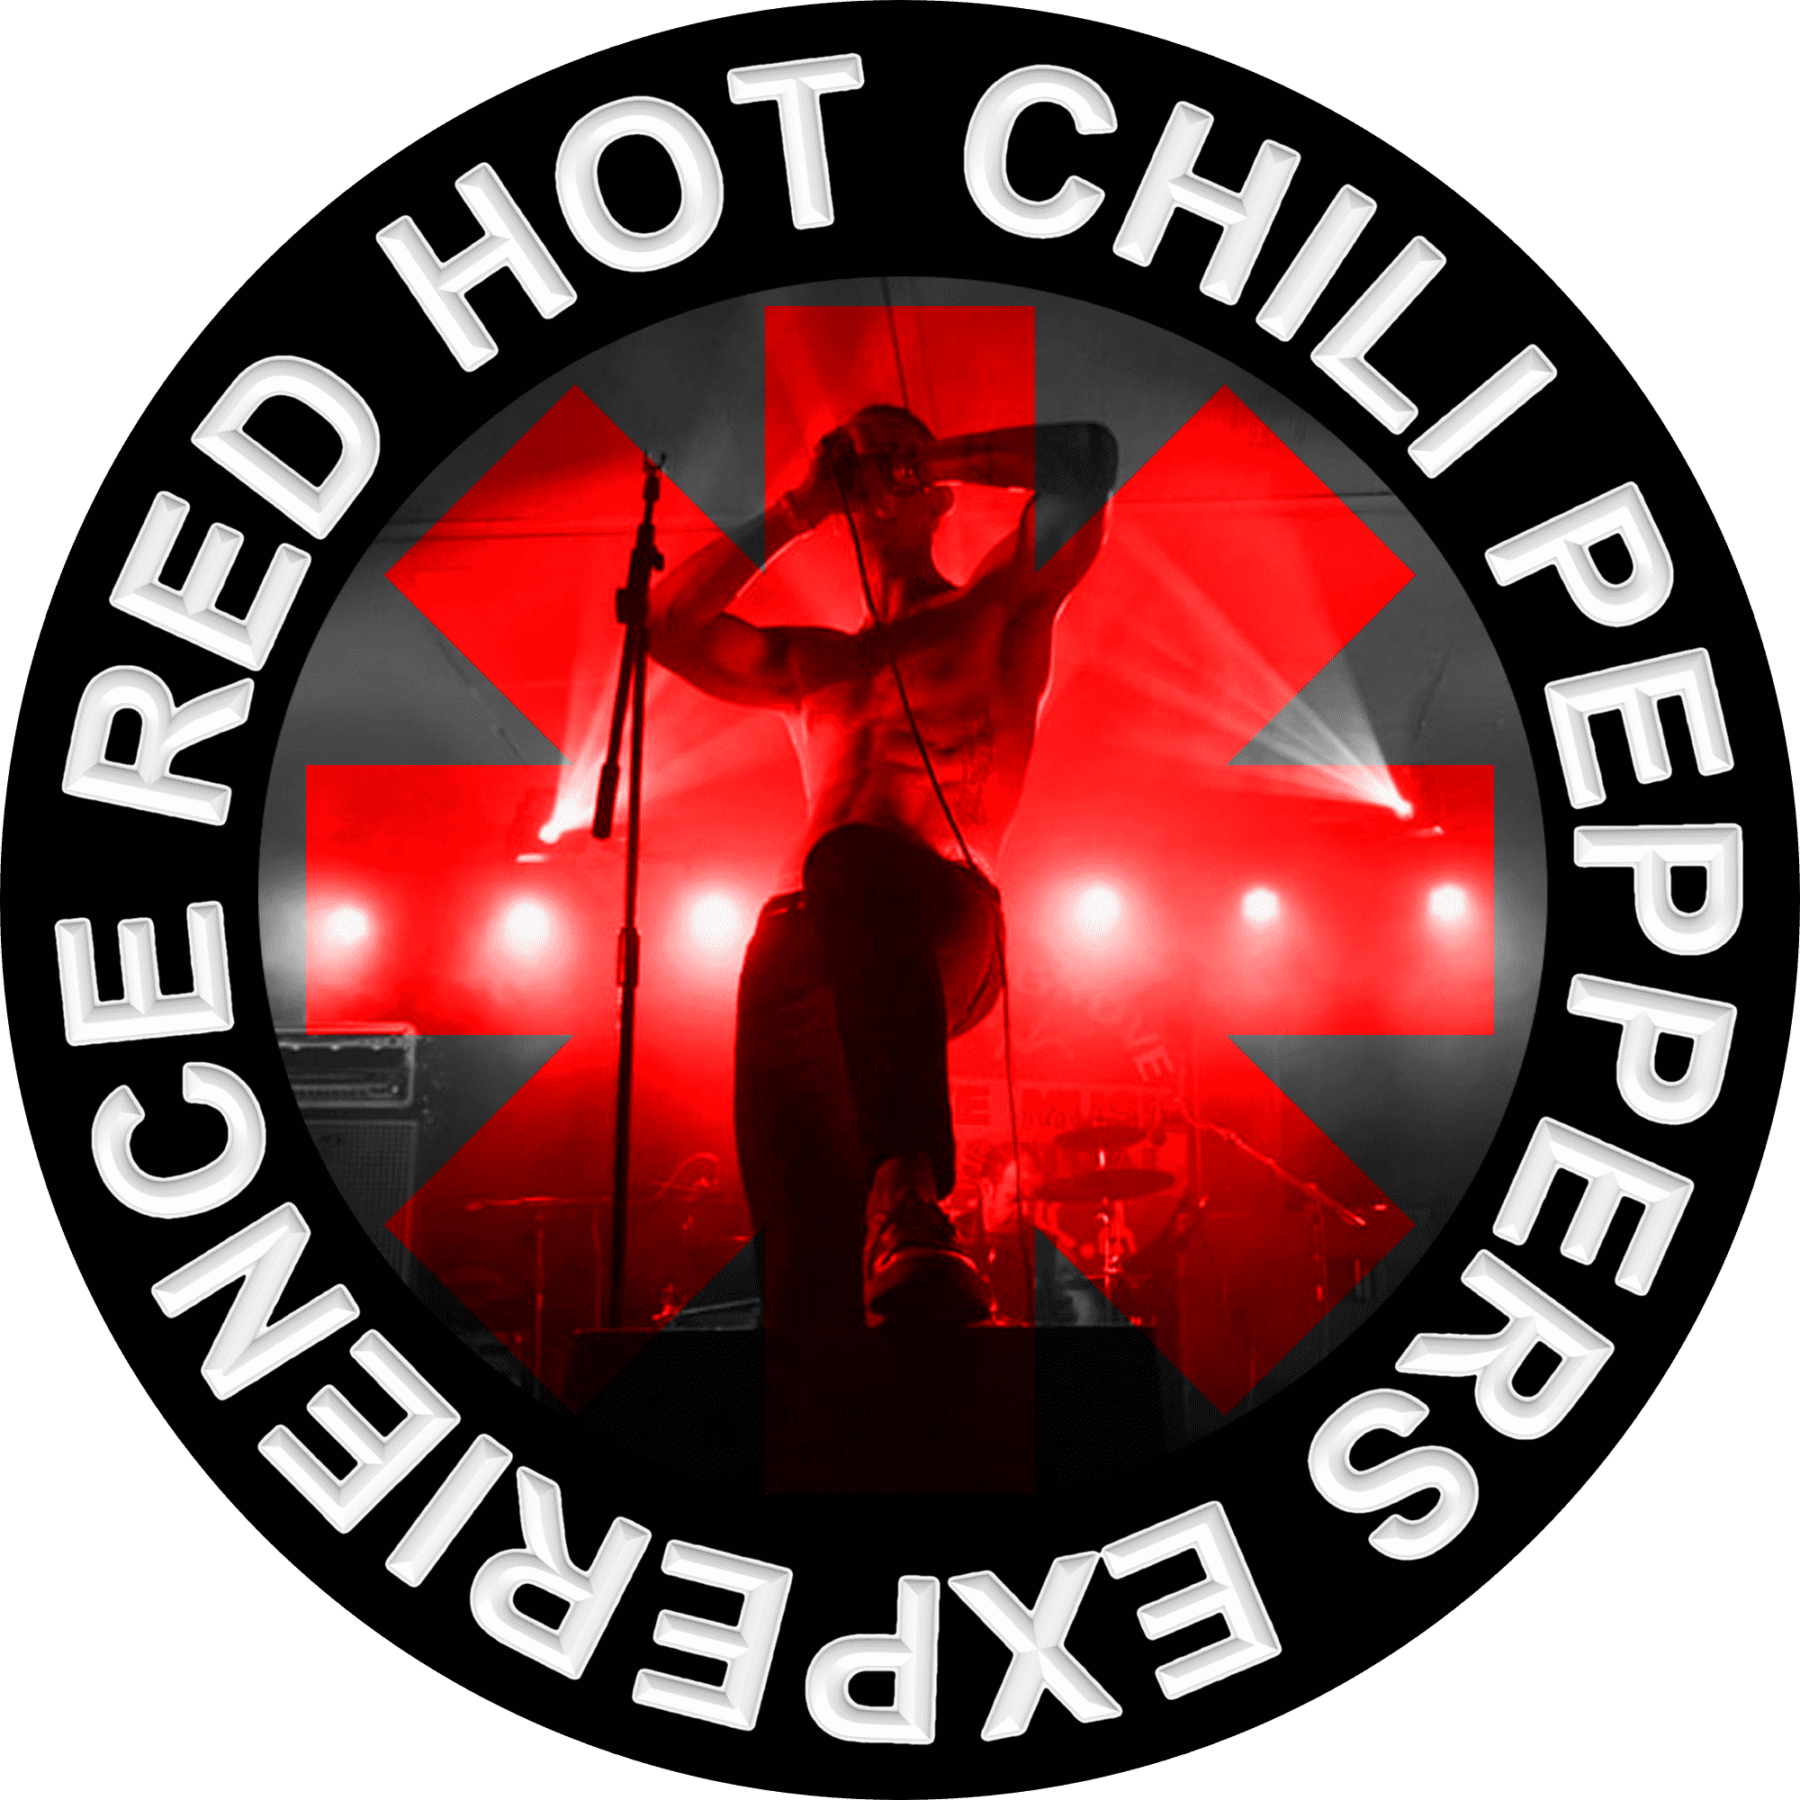 Red hot chili peppers tissue. Red hot Chili Peppers знак. Ред хот Чили Пепперс логотип. RHCP значок. RHCP группа logo.